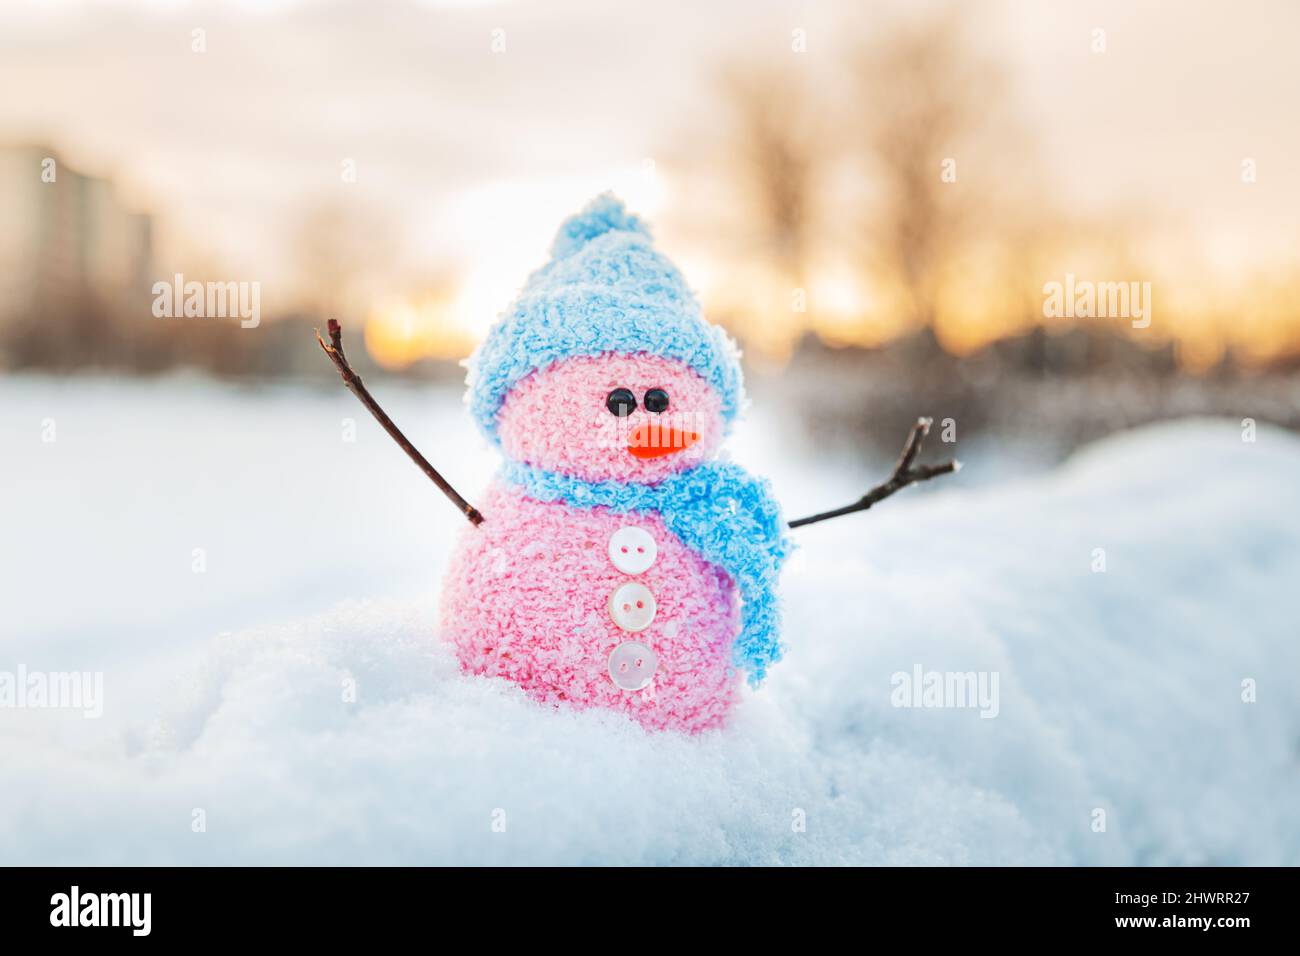 Cute homemade snowman with scarf and hat. Winter's Tale. Winter background. Stock Photo